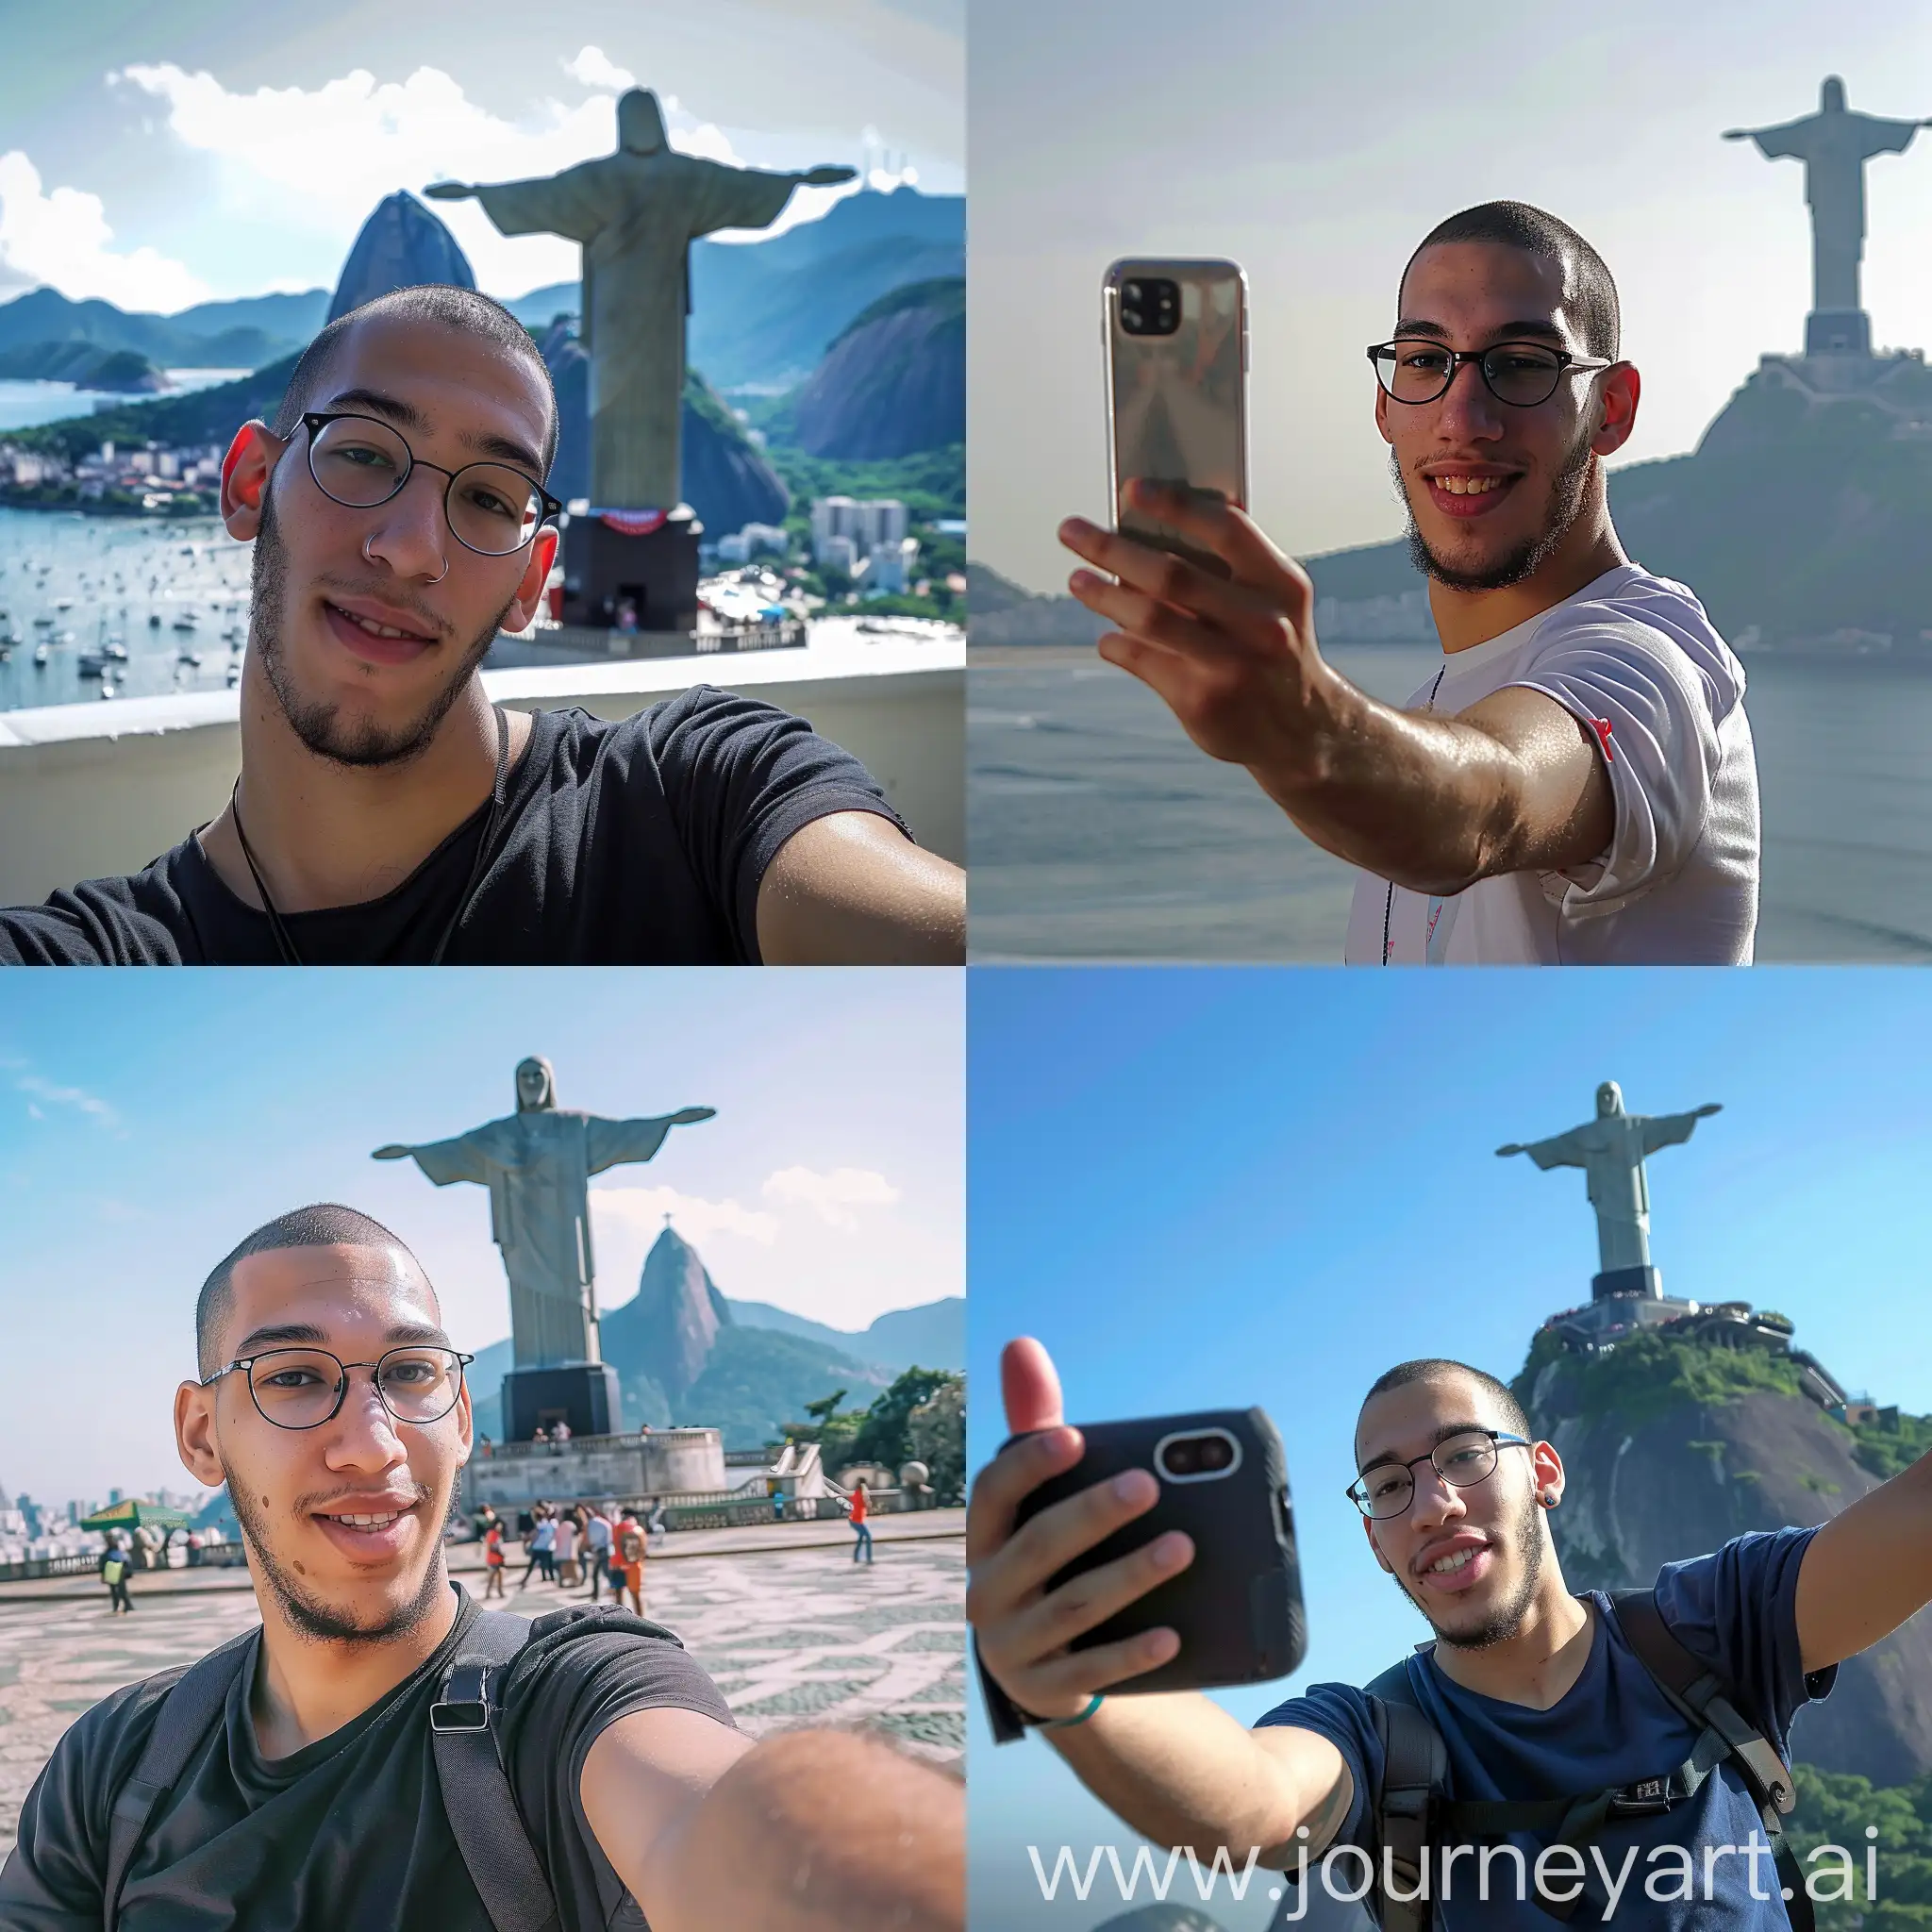 a 24 year old man taking a selfie in Rio de Janeiro, Christ the Redeemer in the background --cref  https://i.pinimg.com/736x/16/09/8b/16098befbca2b28de02529b69c4a1e8e.jpg --cw 0